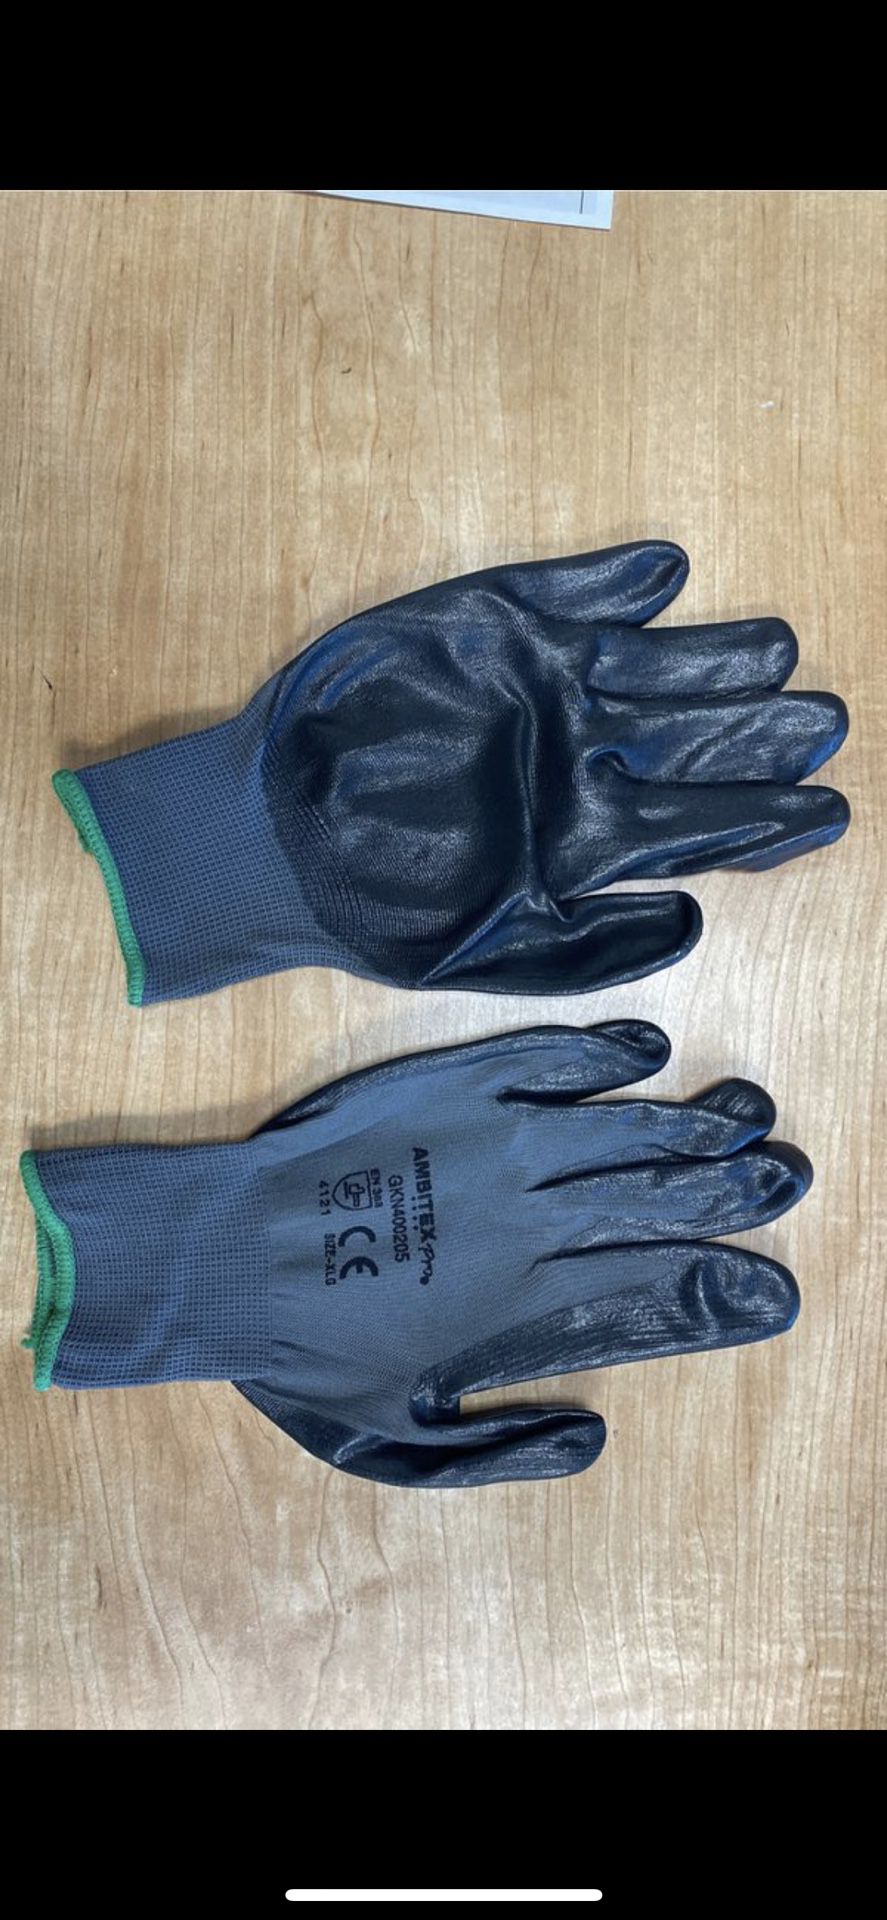 Black Nitrile Foam Coated Gloves 300 pairs Workgloves